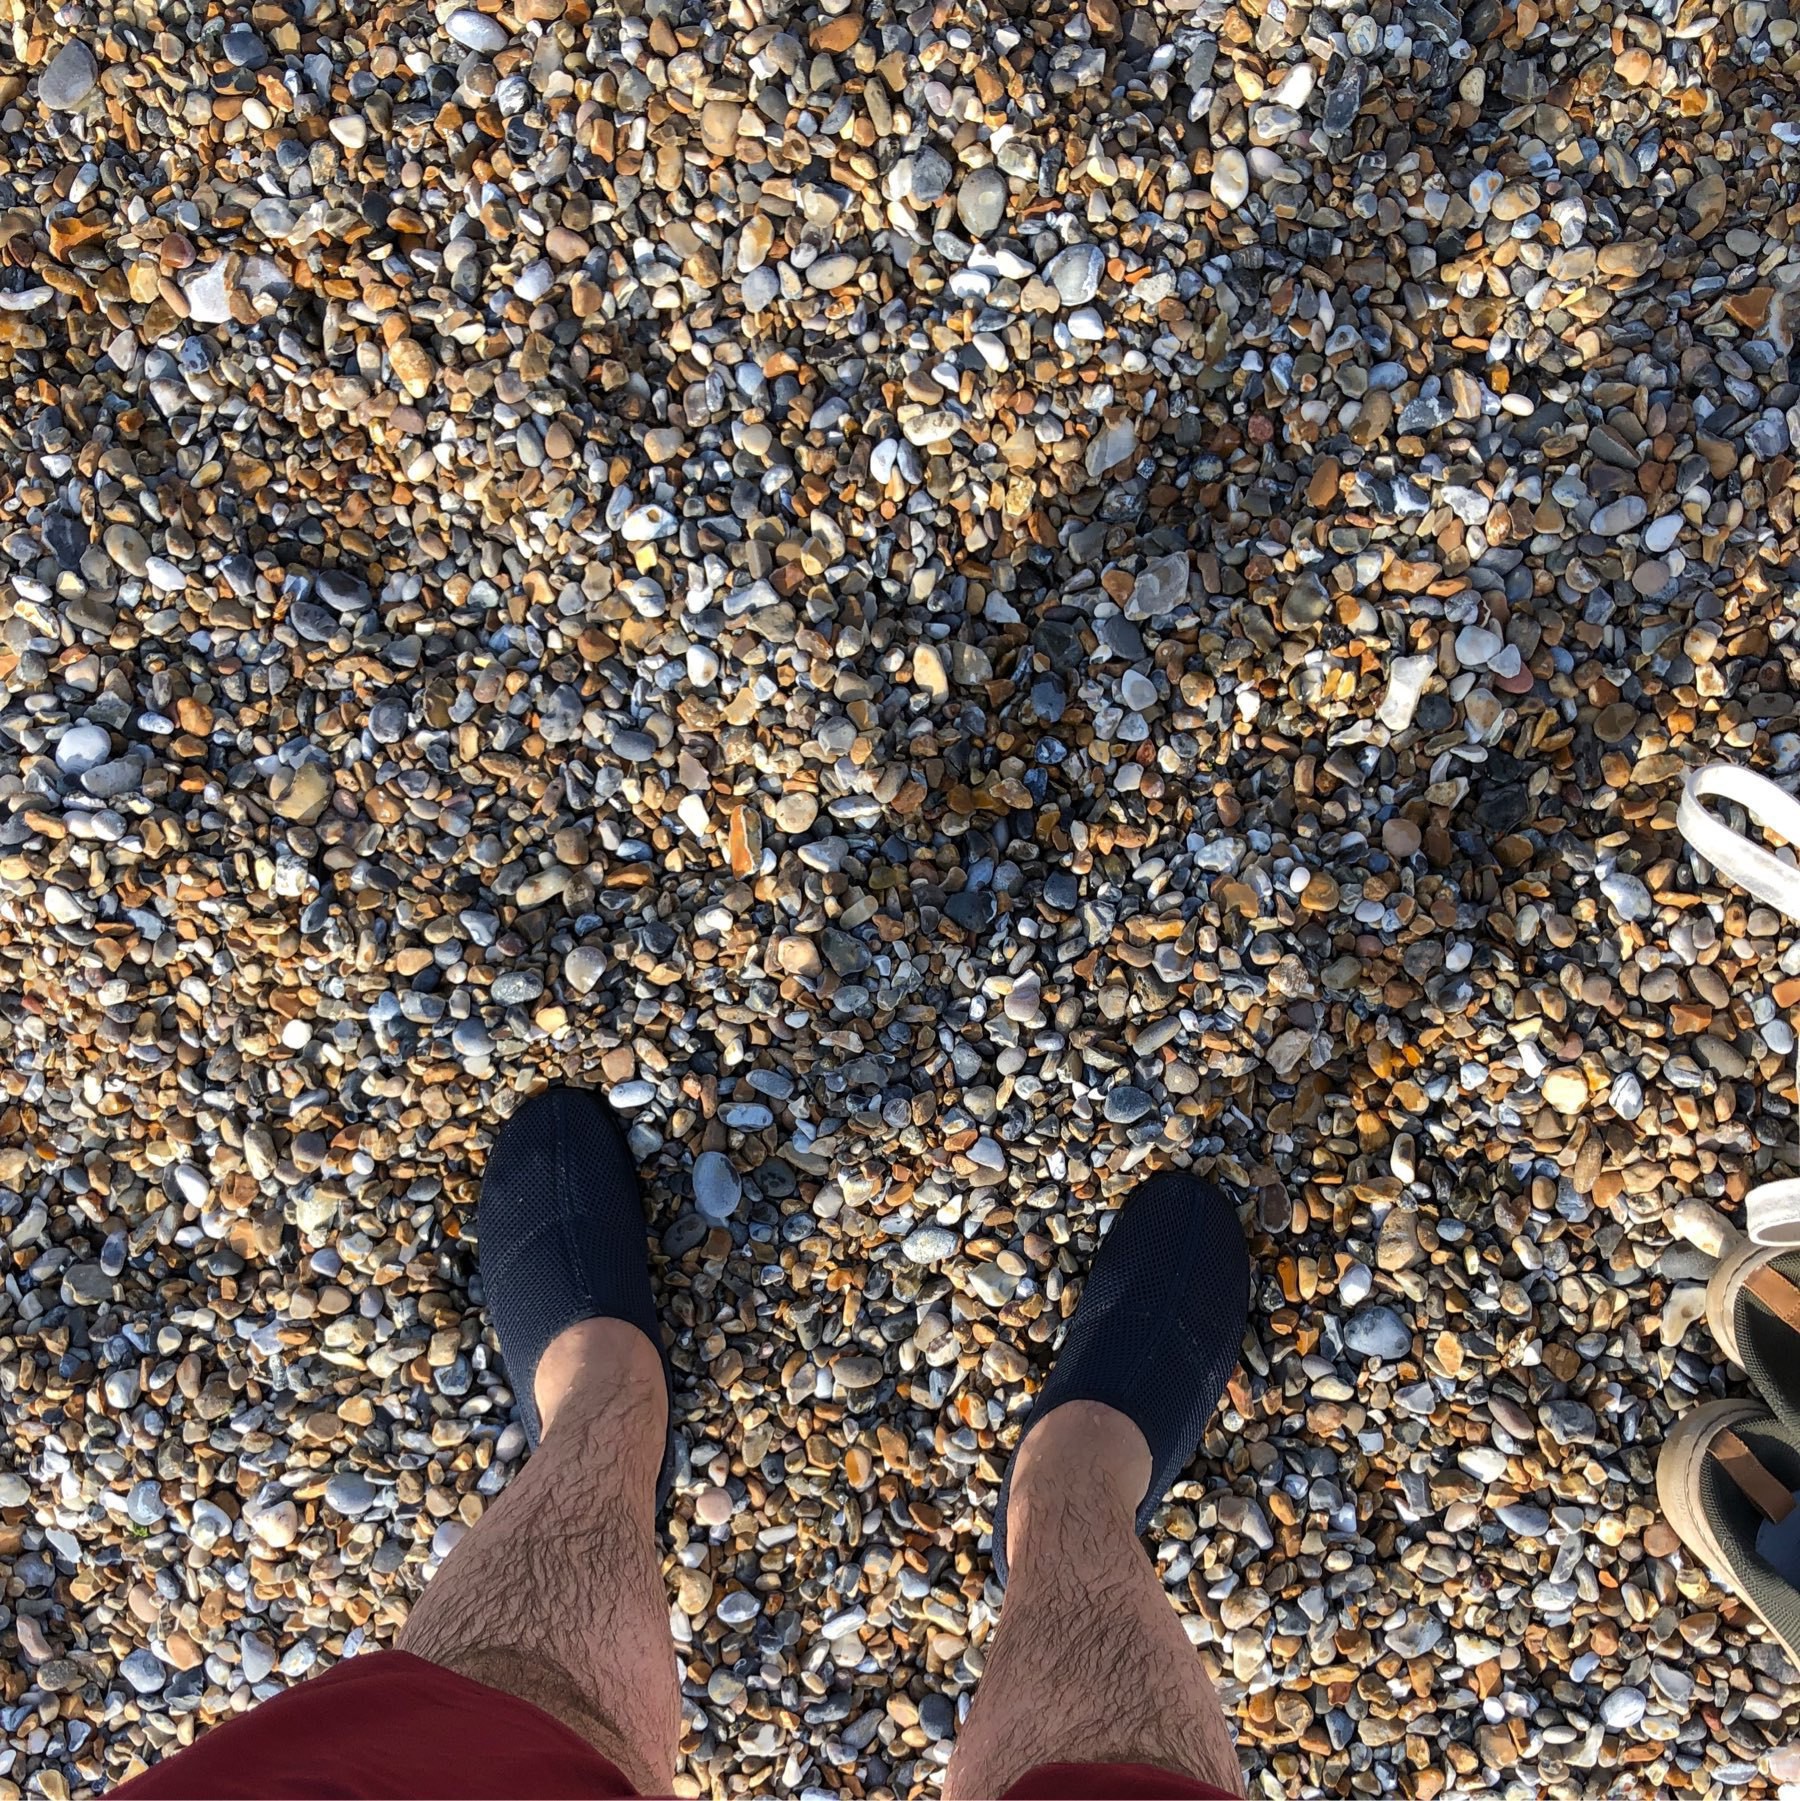 My legs in the pebbly beach.